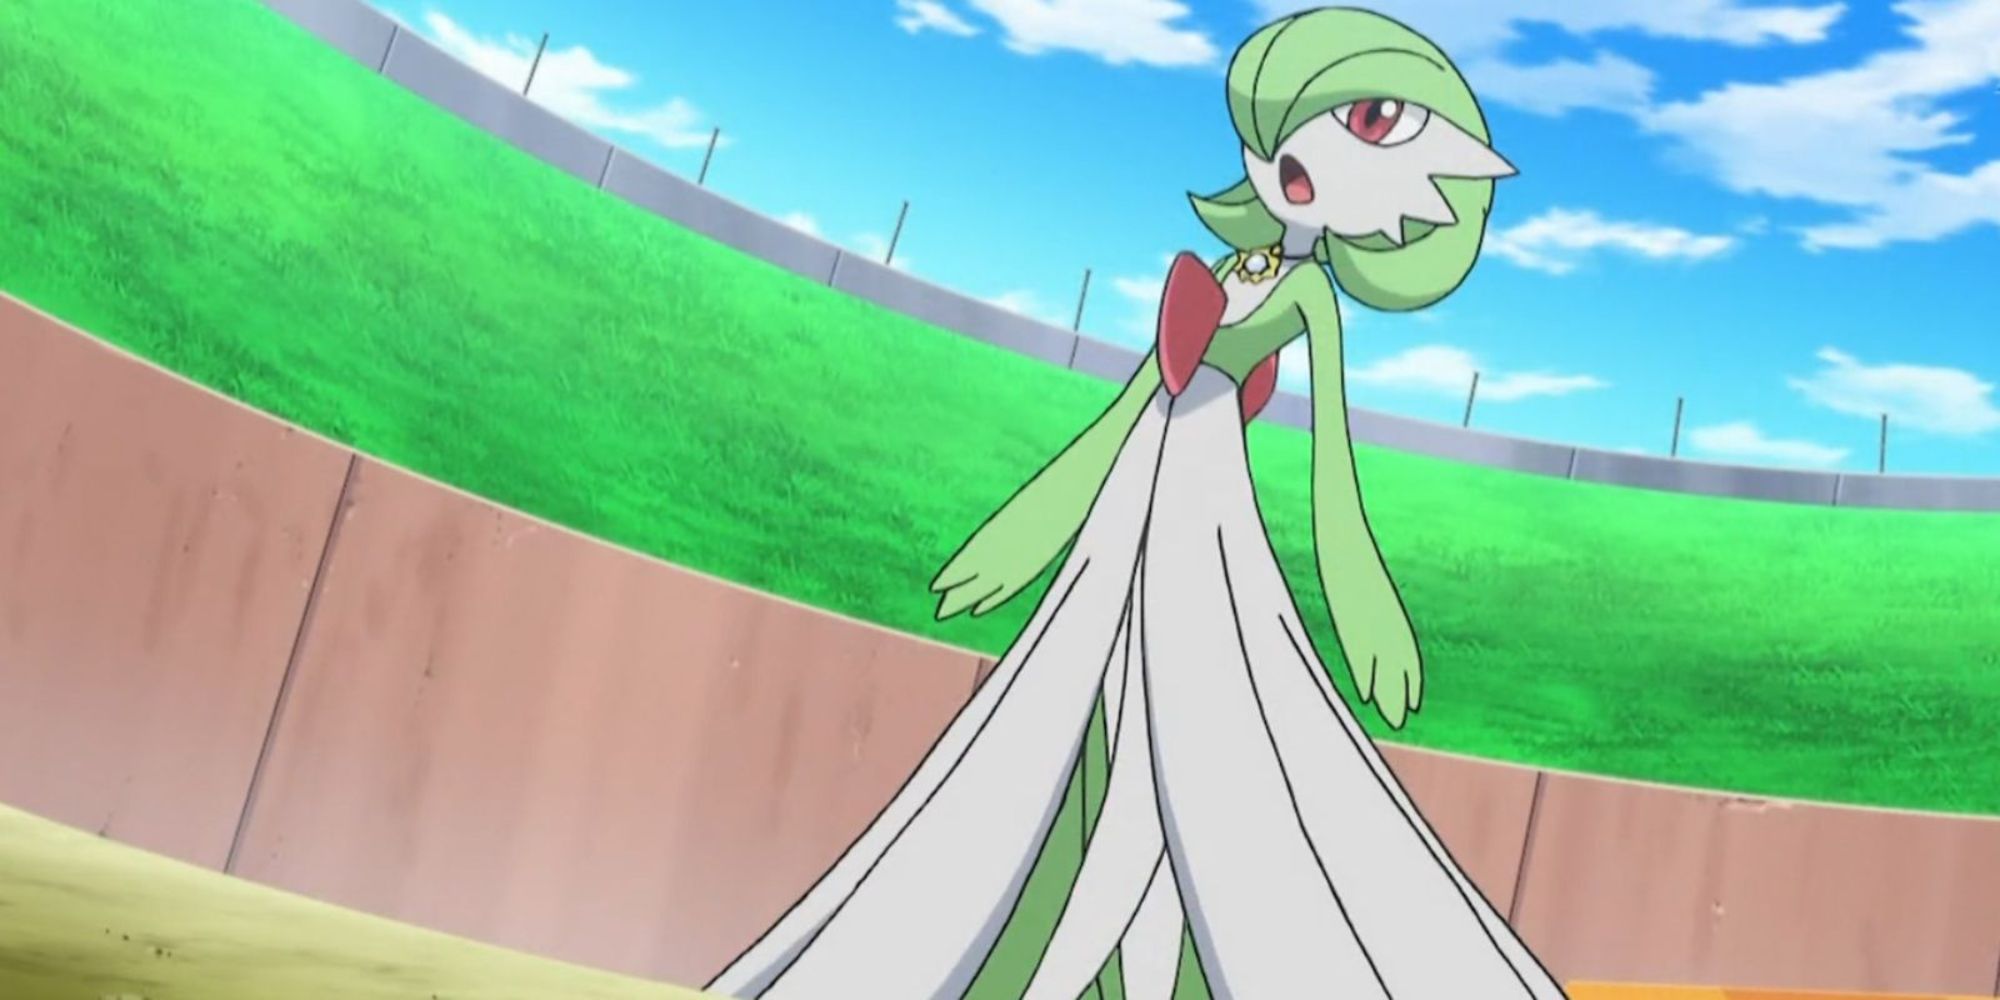 Gardevoir stands in a stadium surrounded by grass